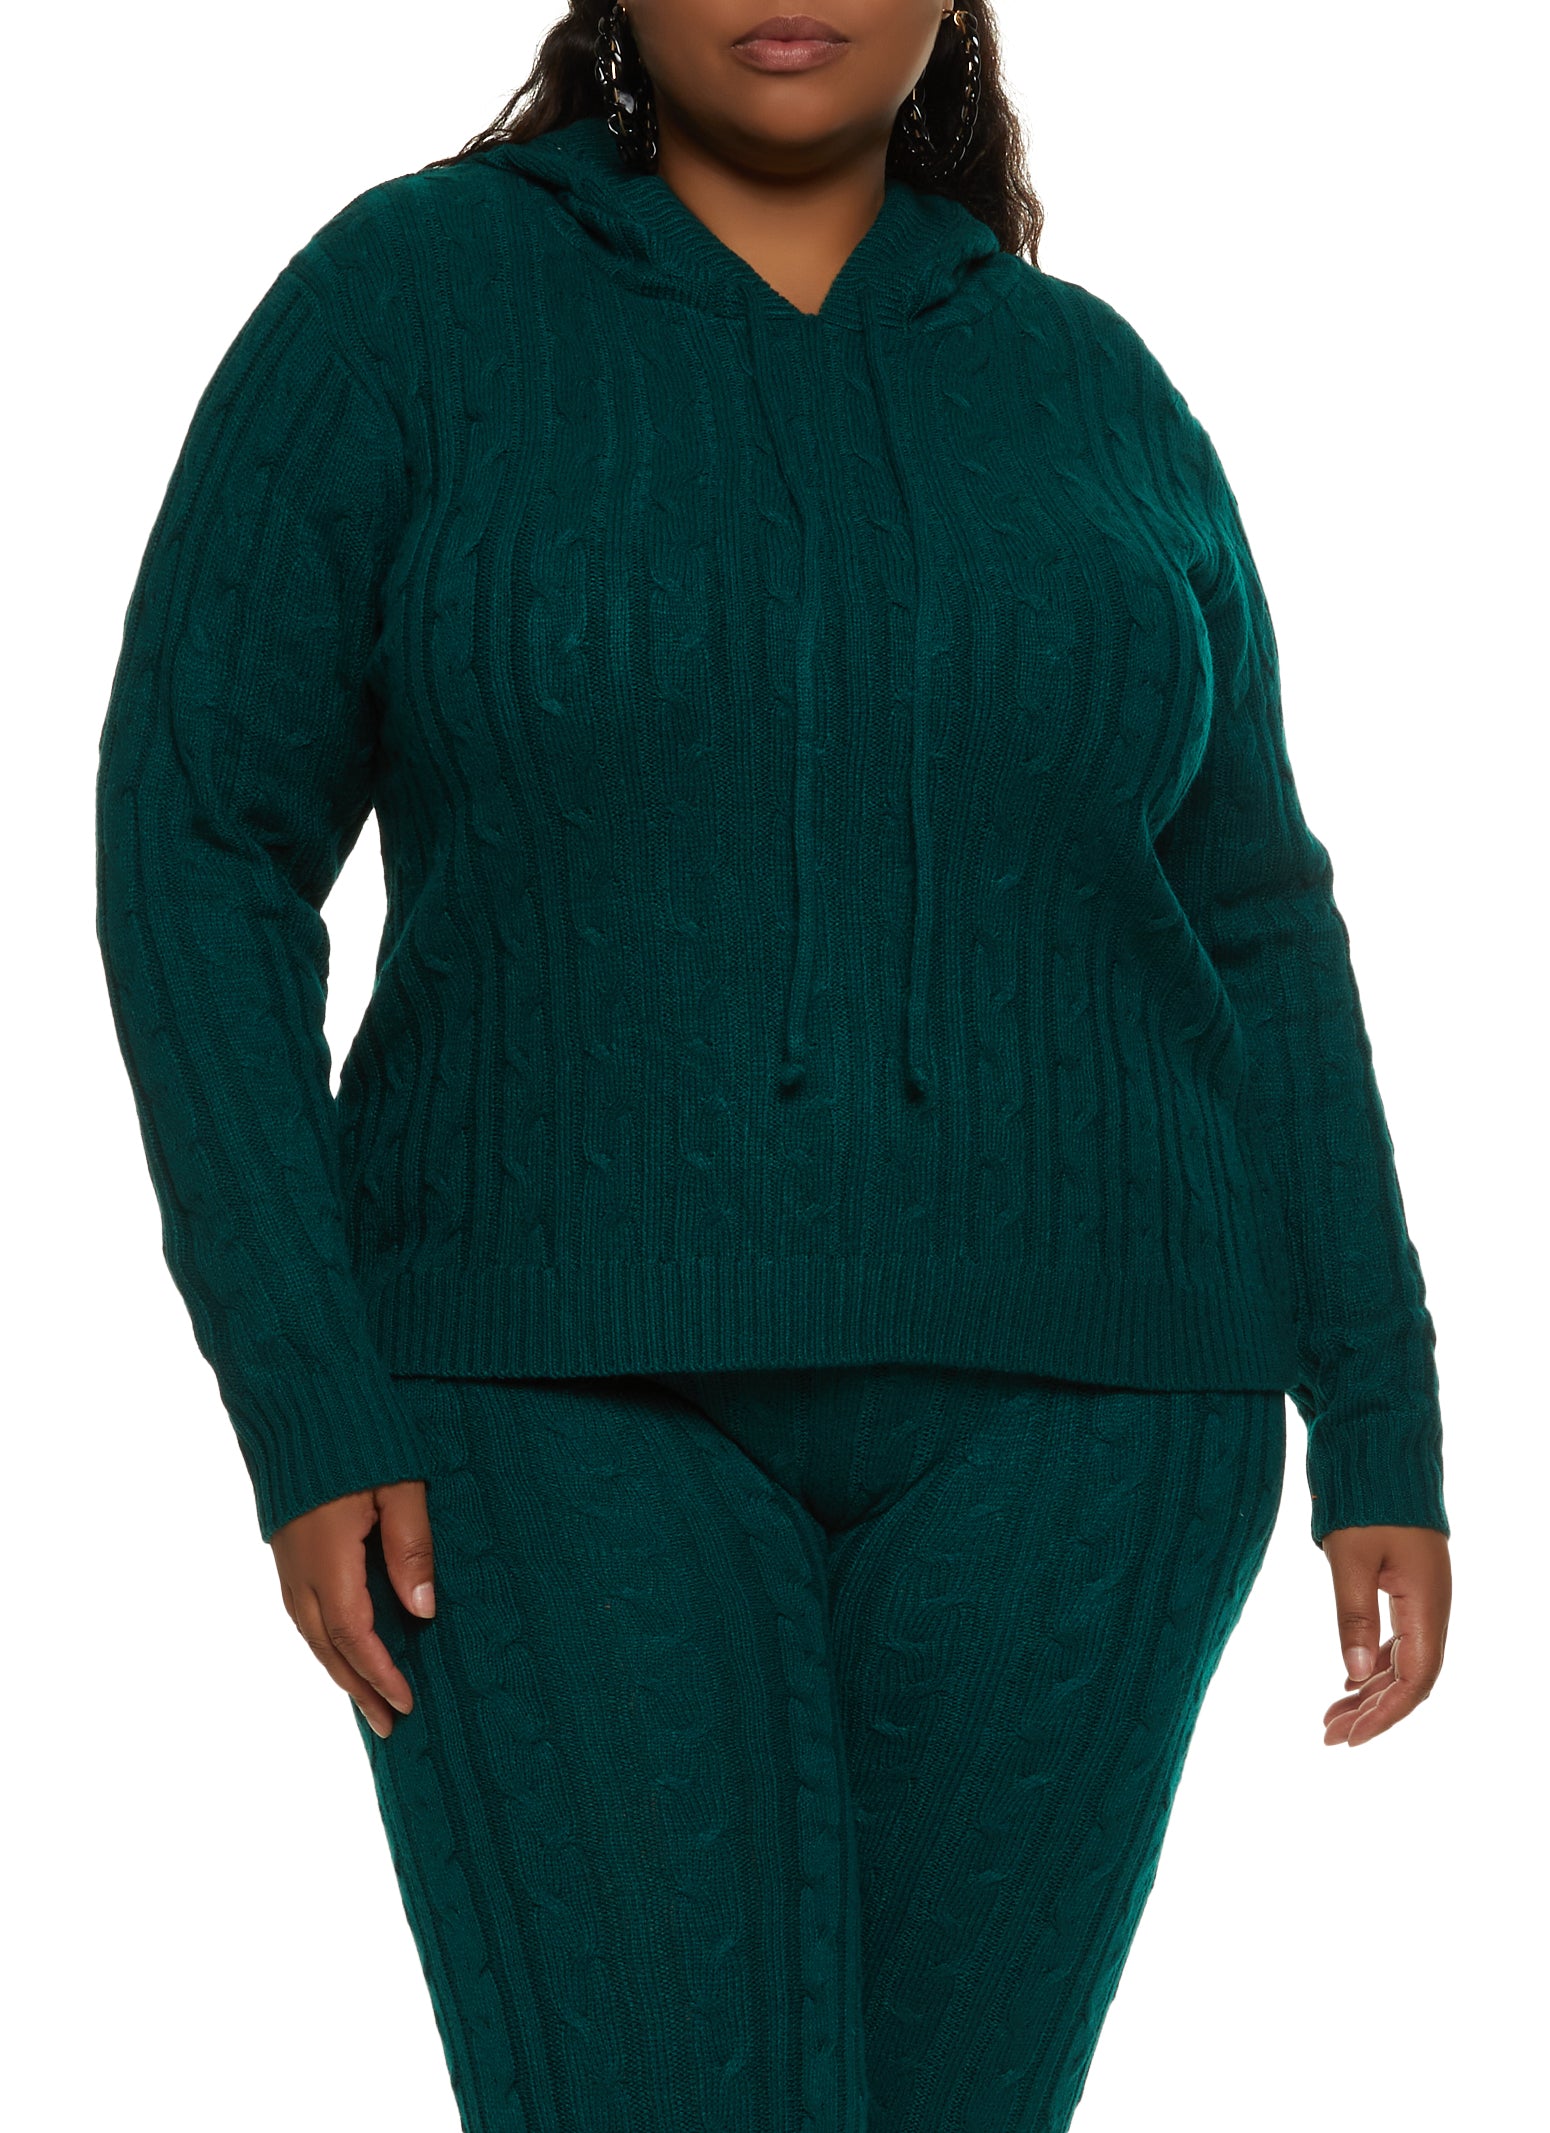 Womens Plus Size Cable Knit Hoodie, Green, Size 1X